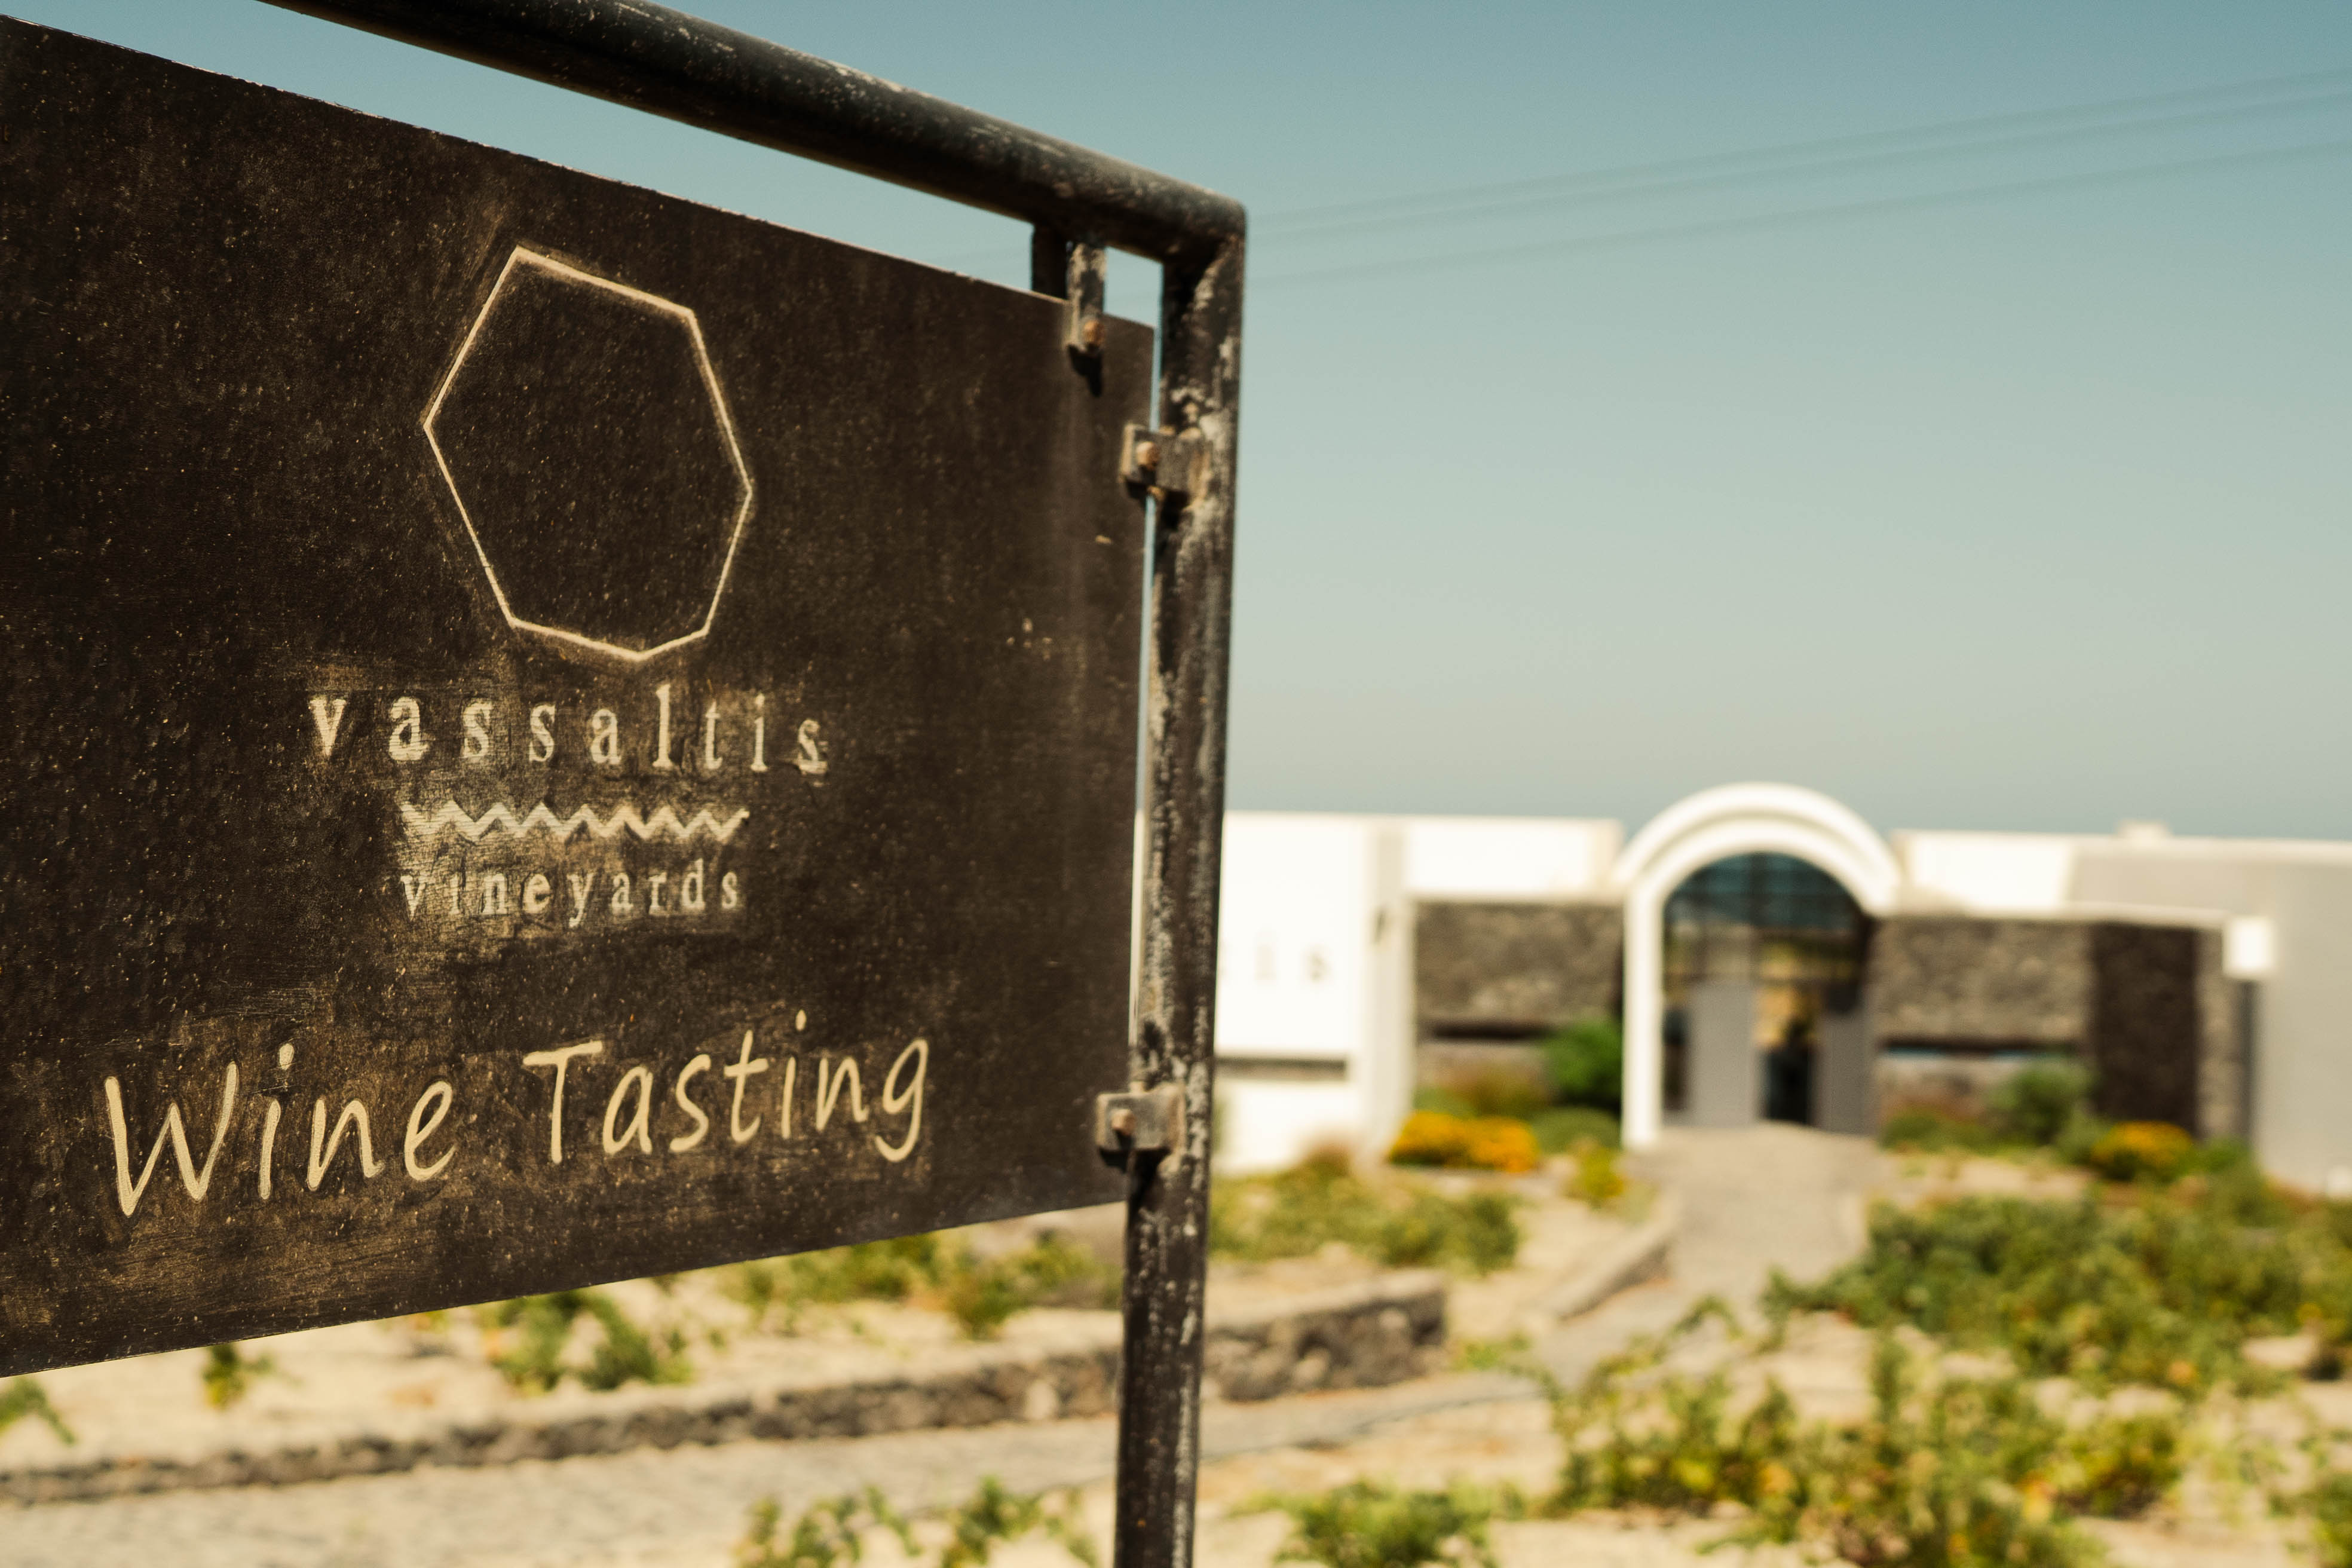 A little outside the village of Vourvoulos (to the north), is the Vassaltis Winery